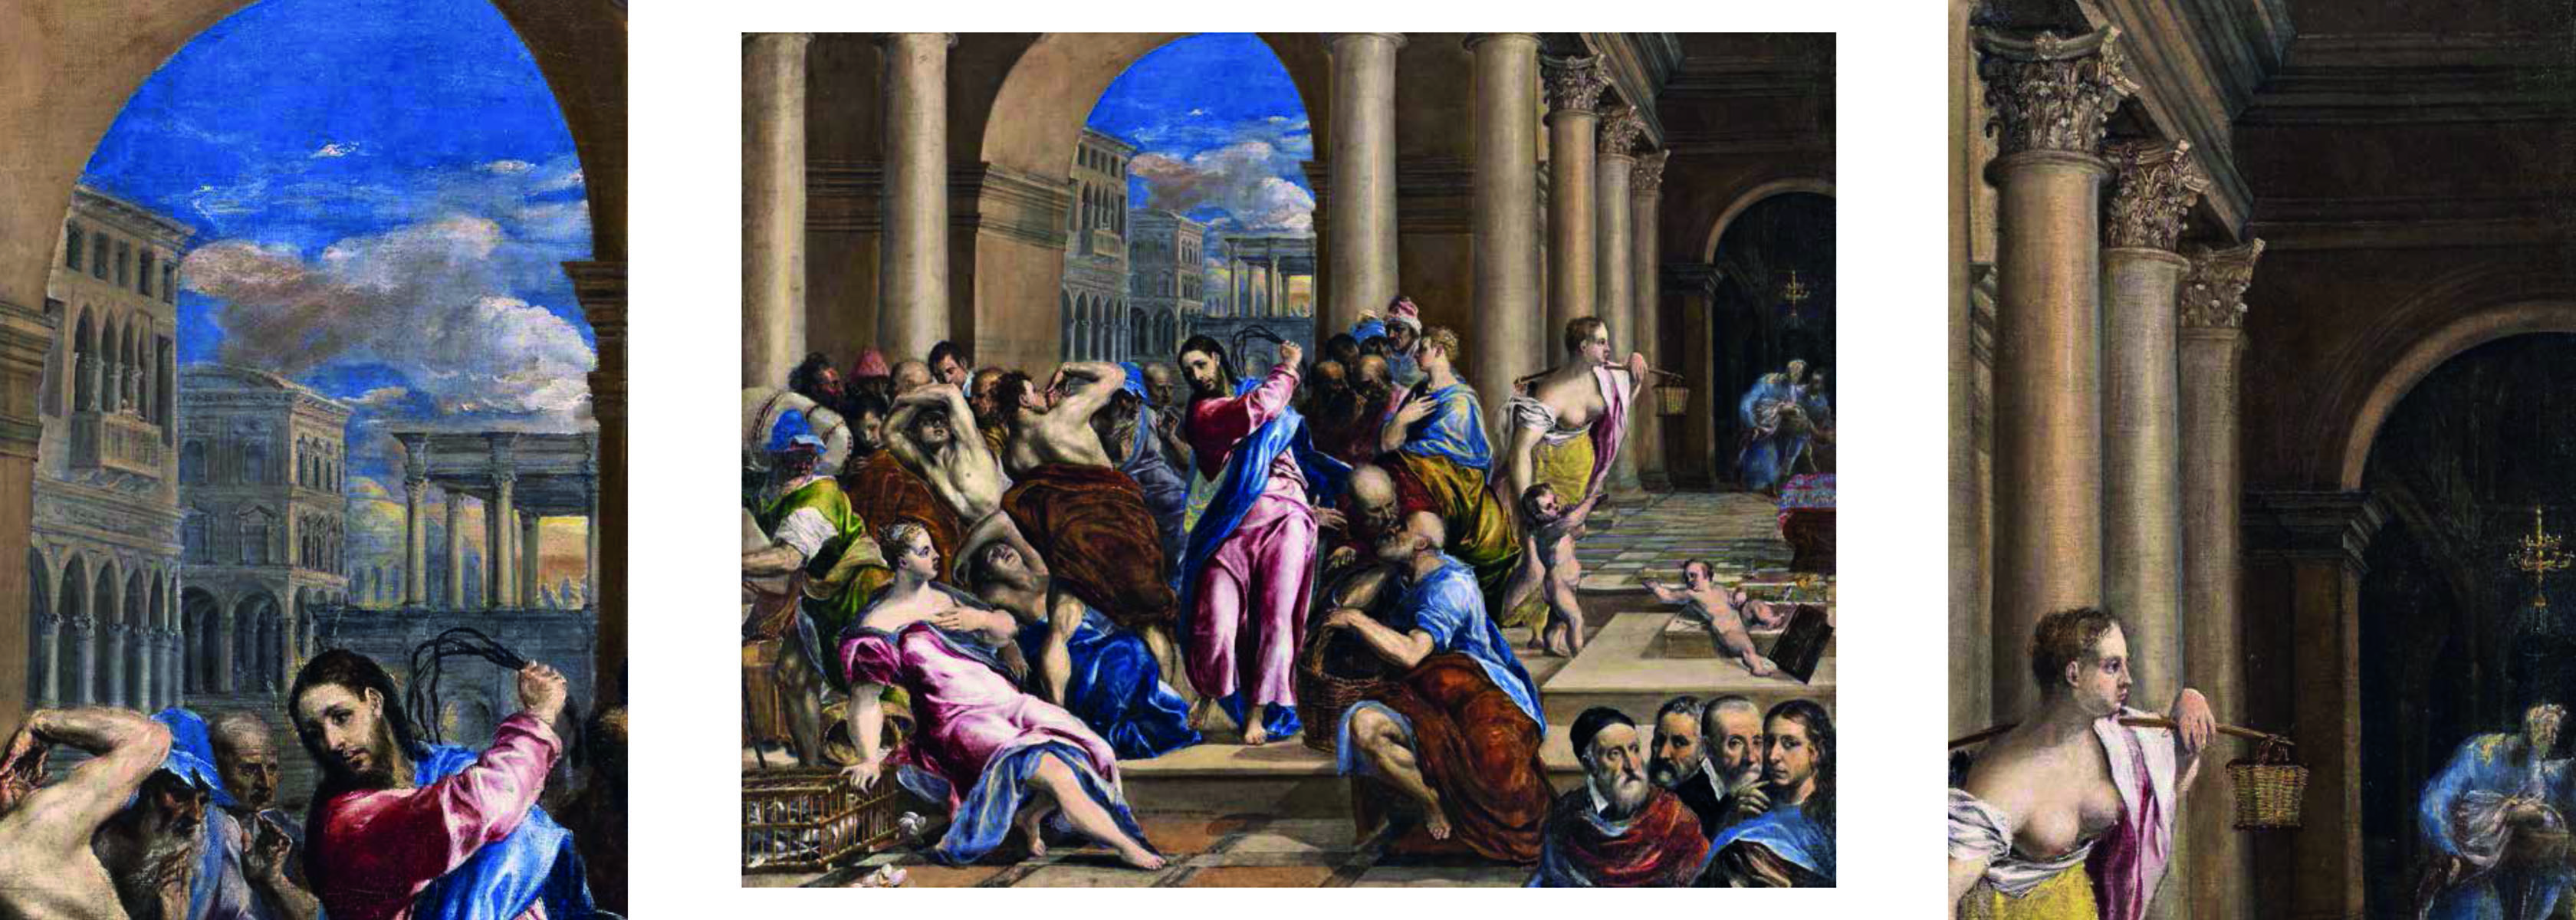 Side altar painting, Opening of the Fifth Seal by El Greco, El Greco in yellow font above.